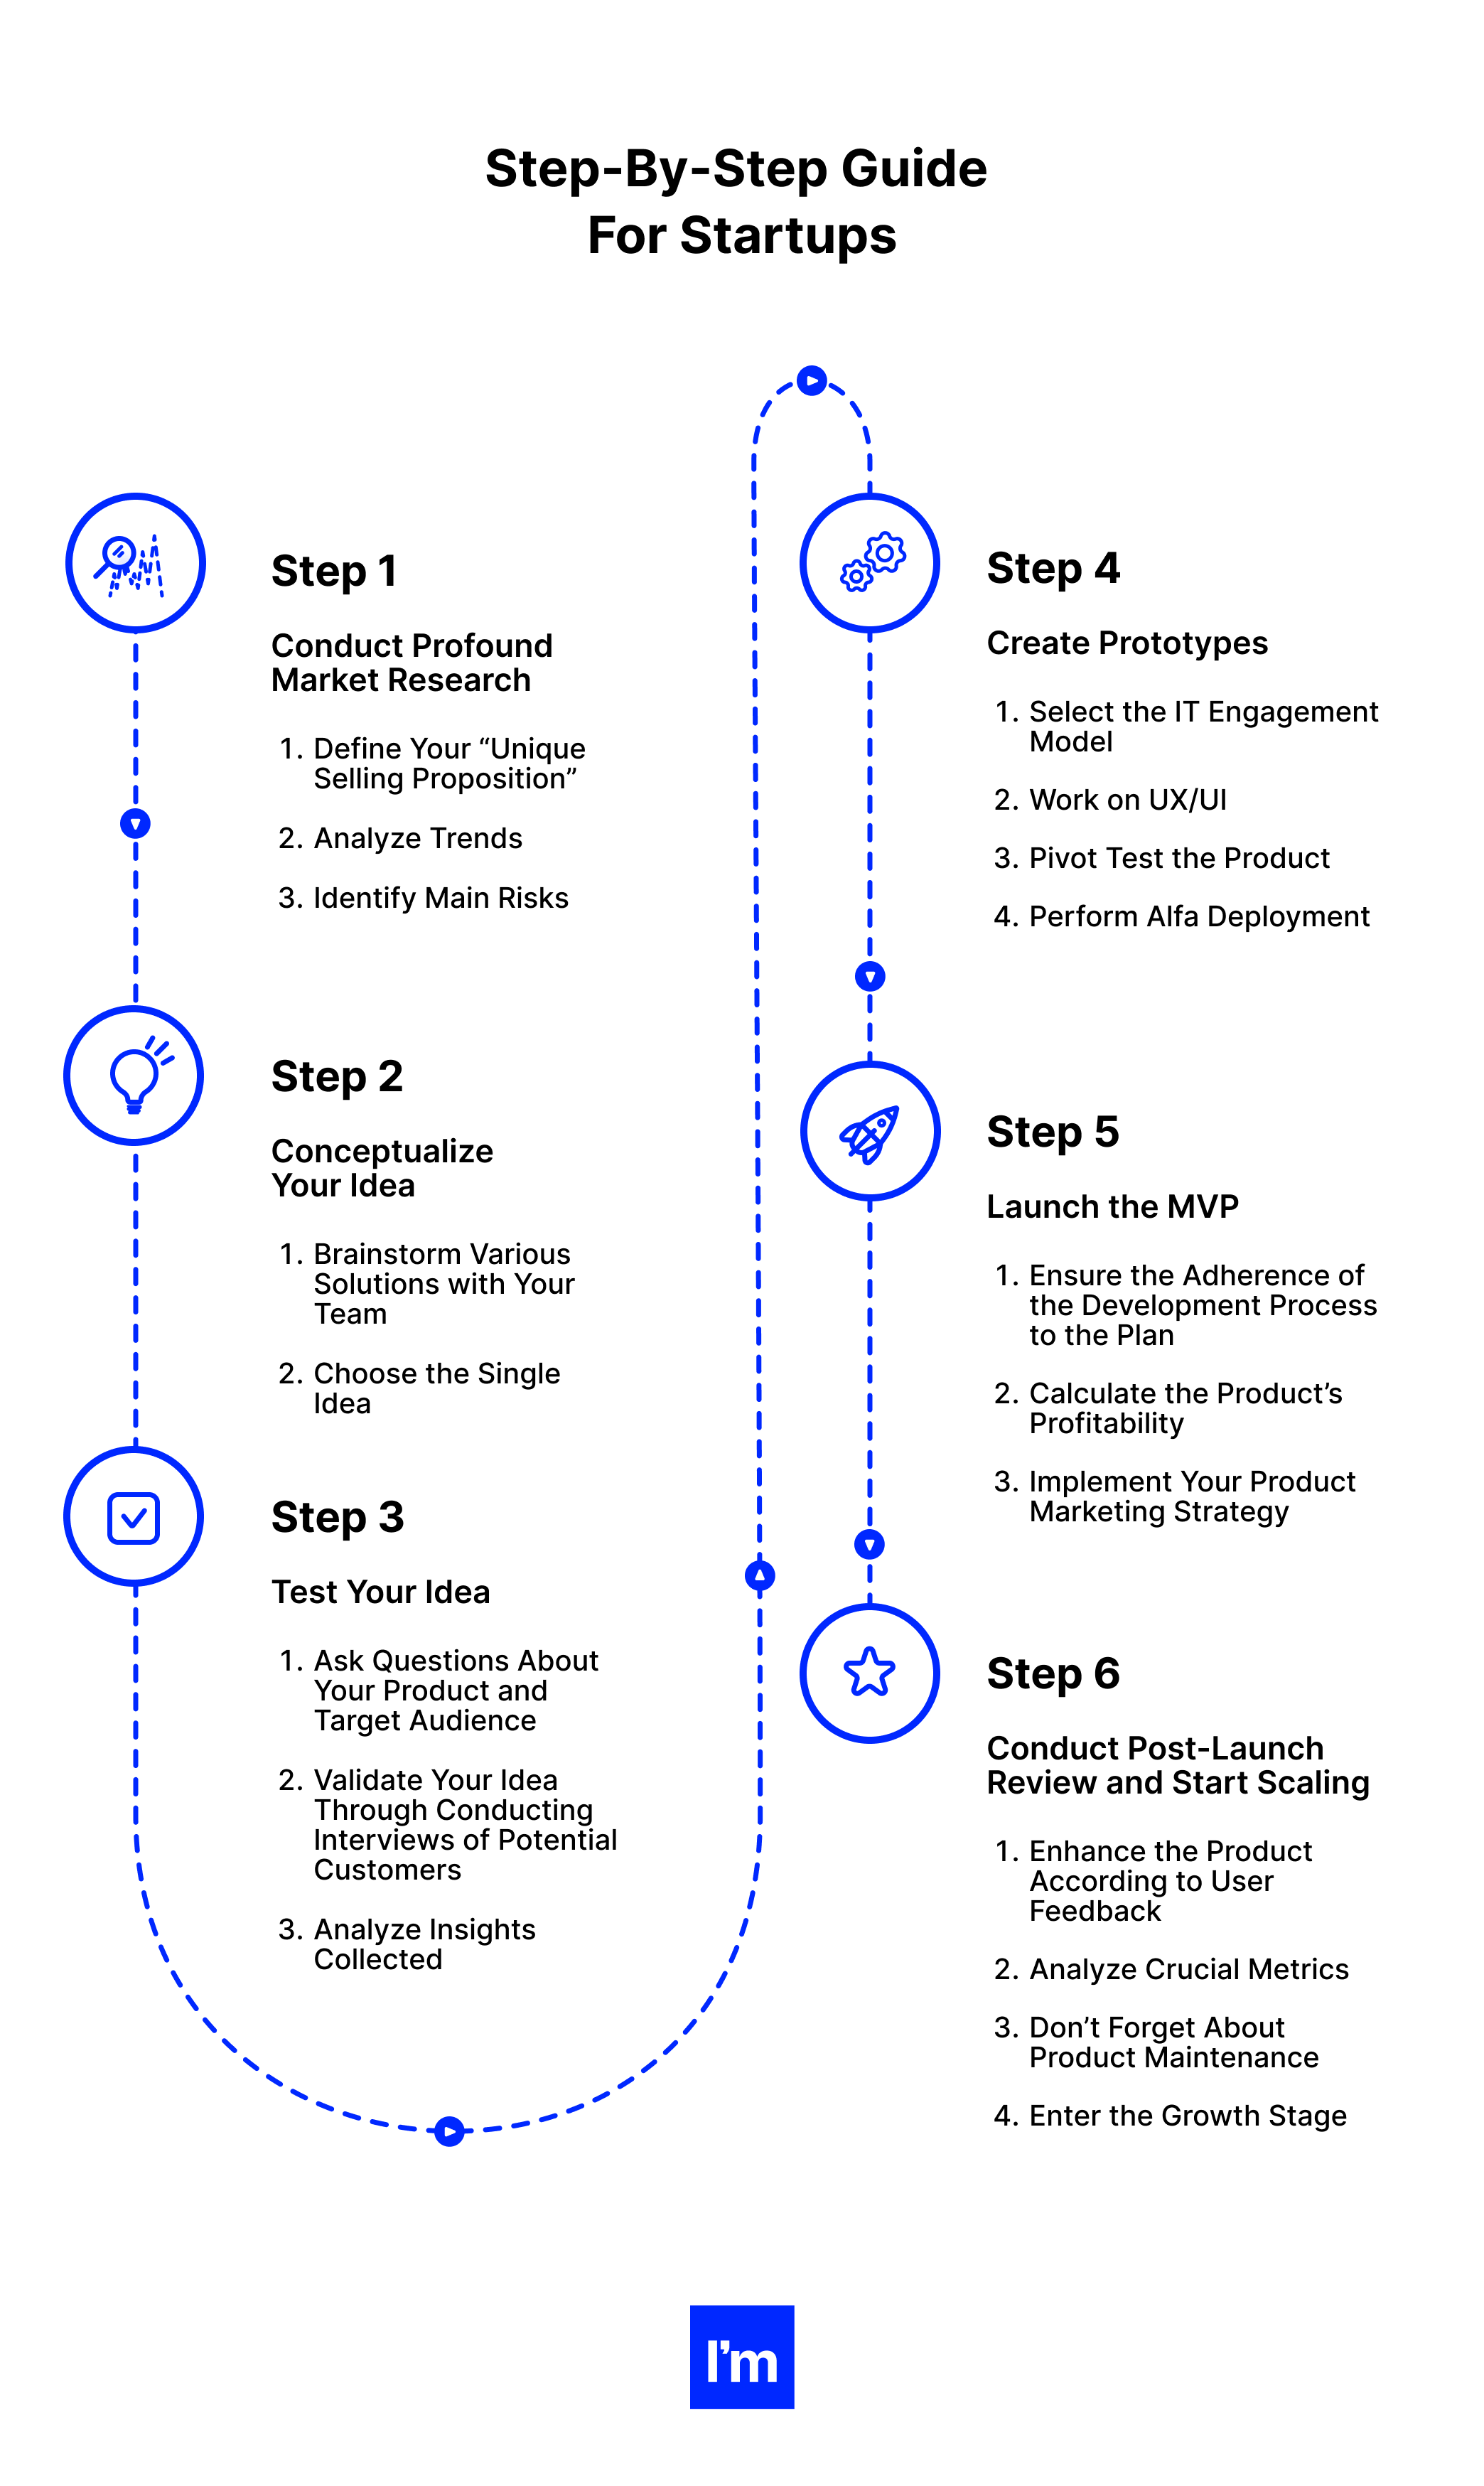 infographic -Step-By-Step Guide For Startups